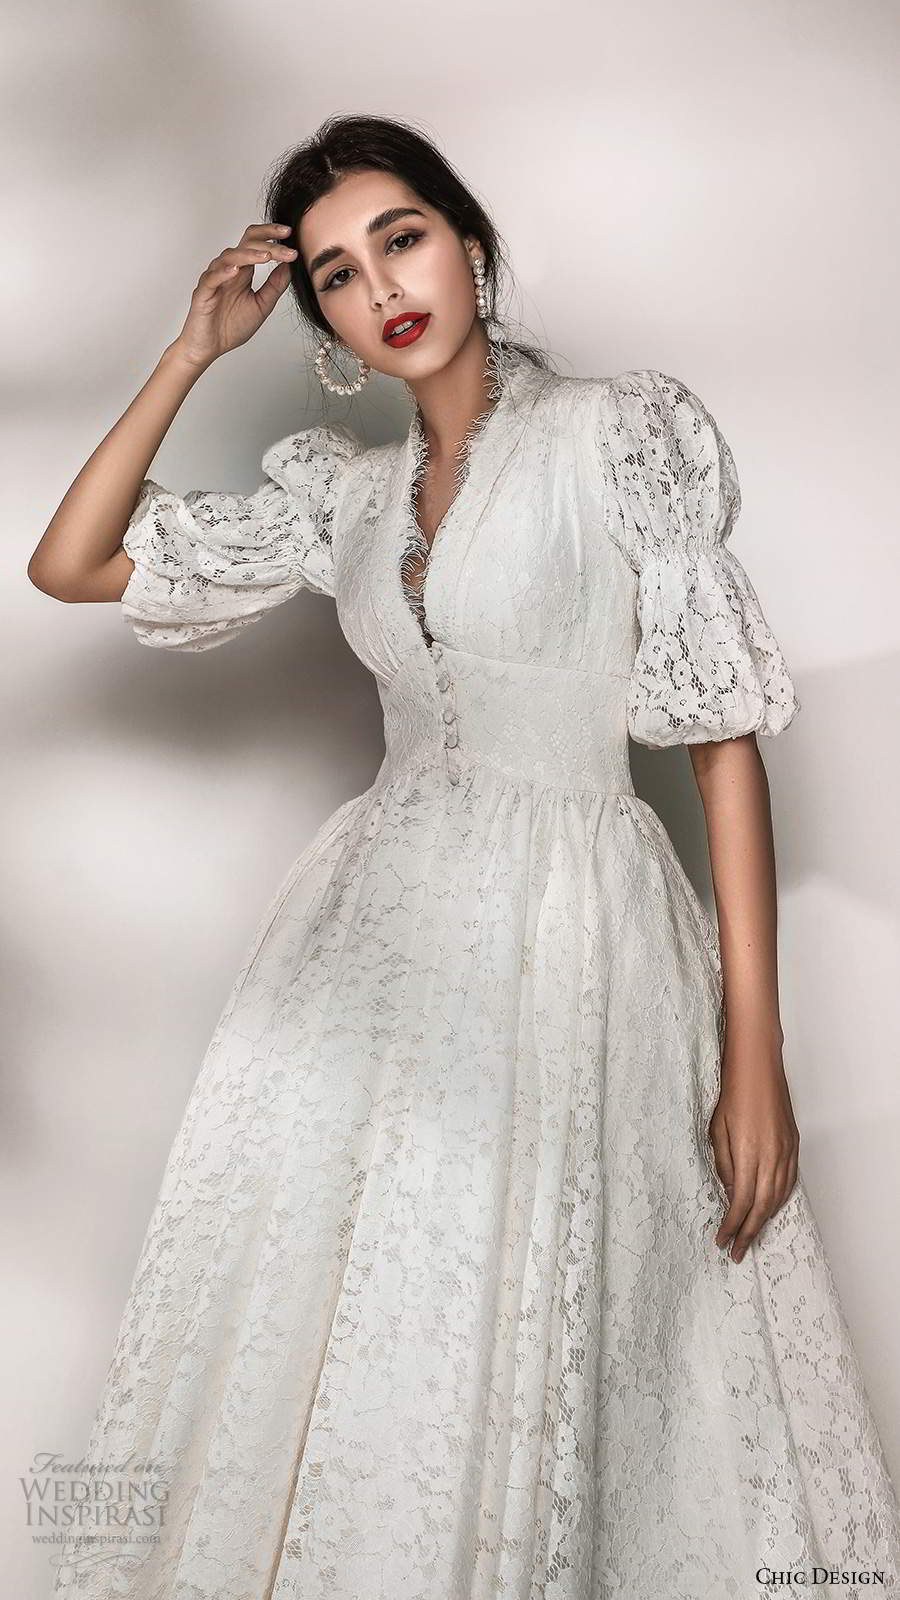 chic design 2020 bridal puff half sleeves v neckline embellished lace a line ball gown wedding dress chapel train (1) zv